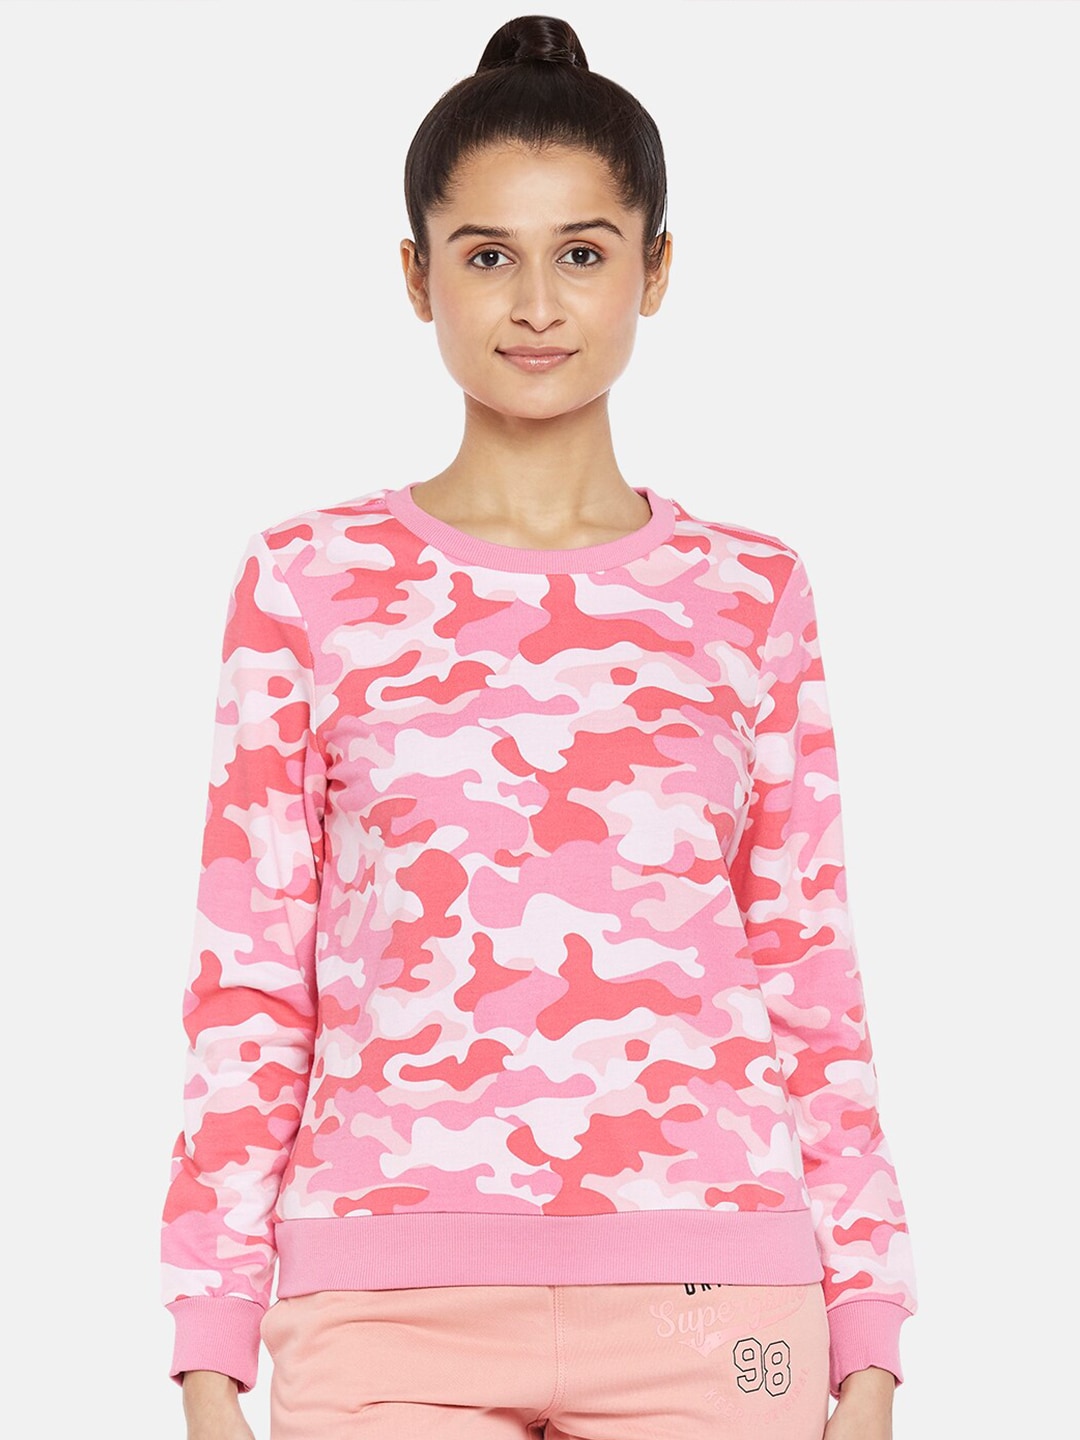 Ajile by Pantaloons Women Pink Camouflage Printed Pure Cotton Sweatshirt Price in India